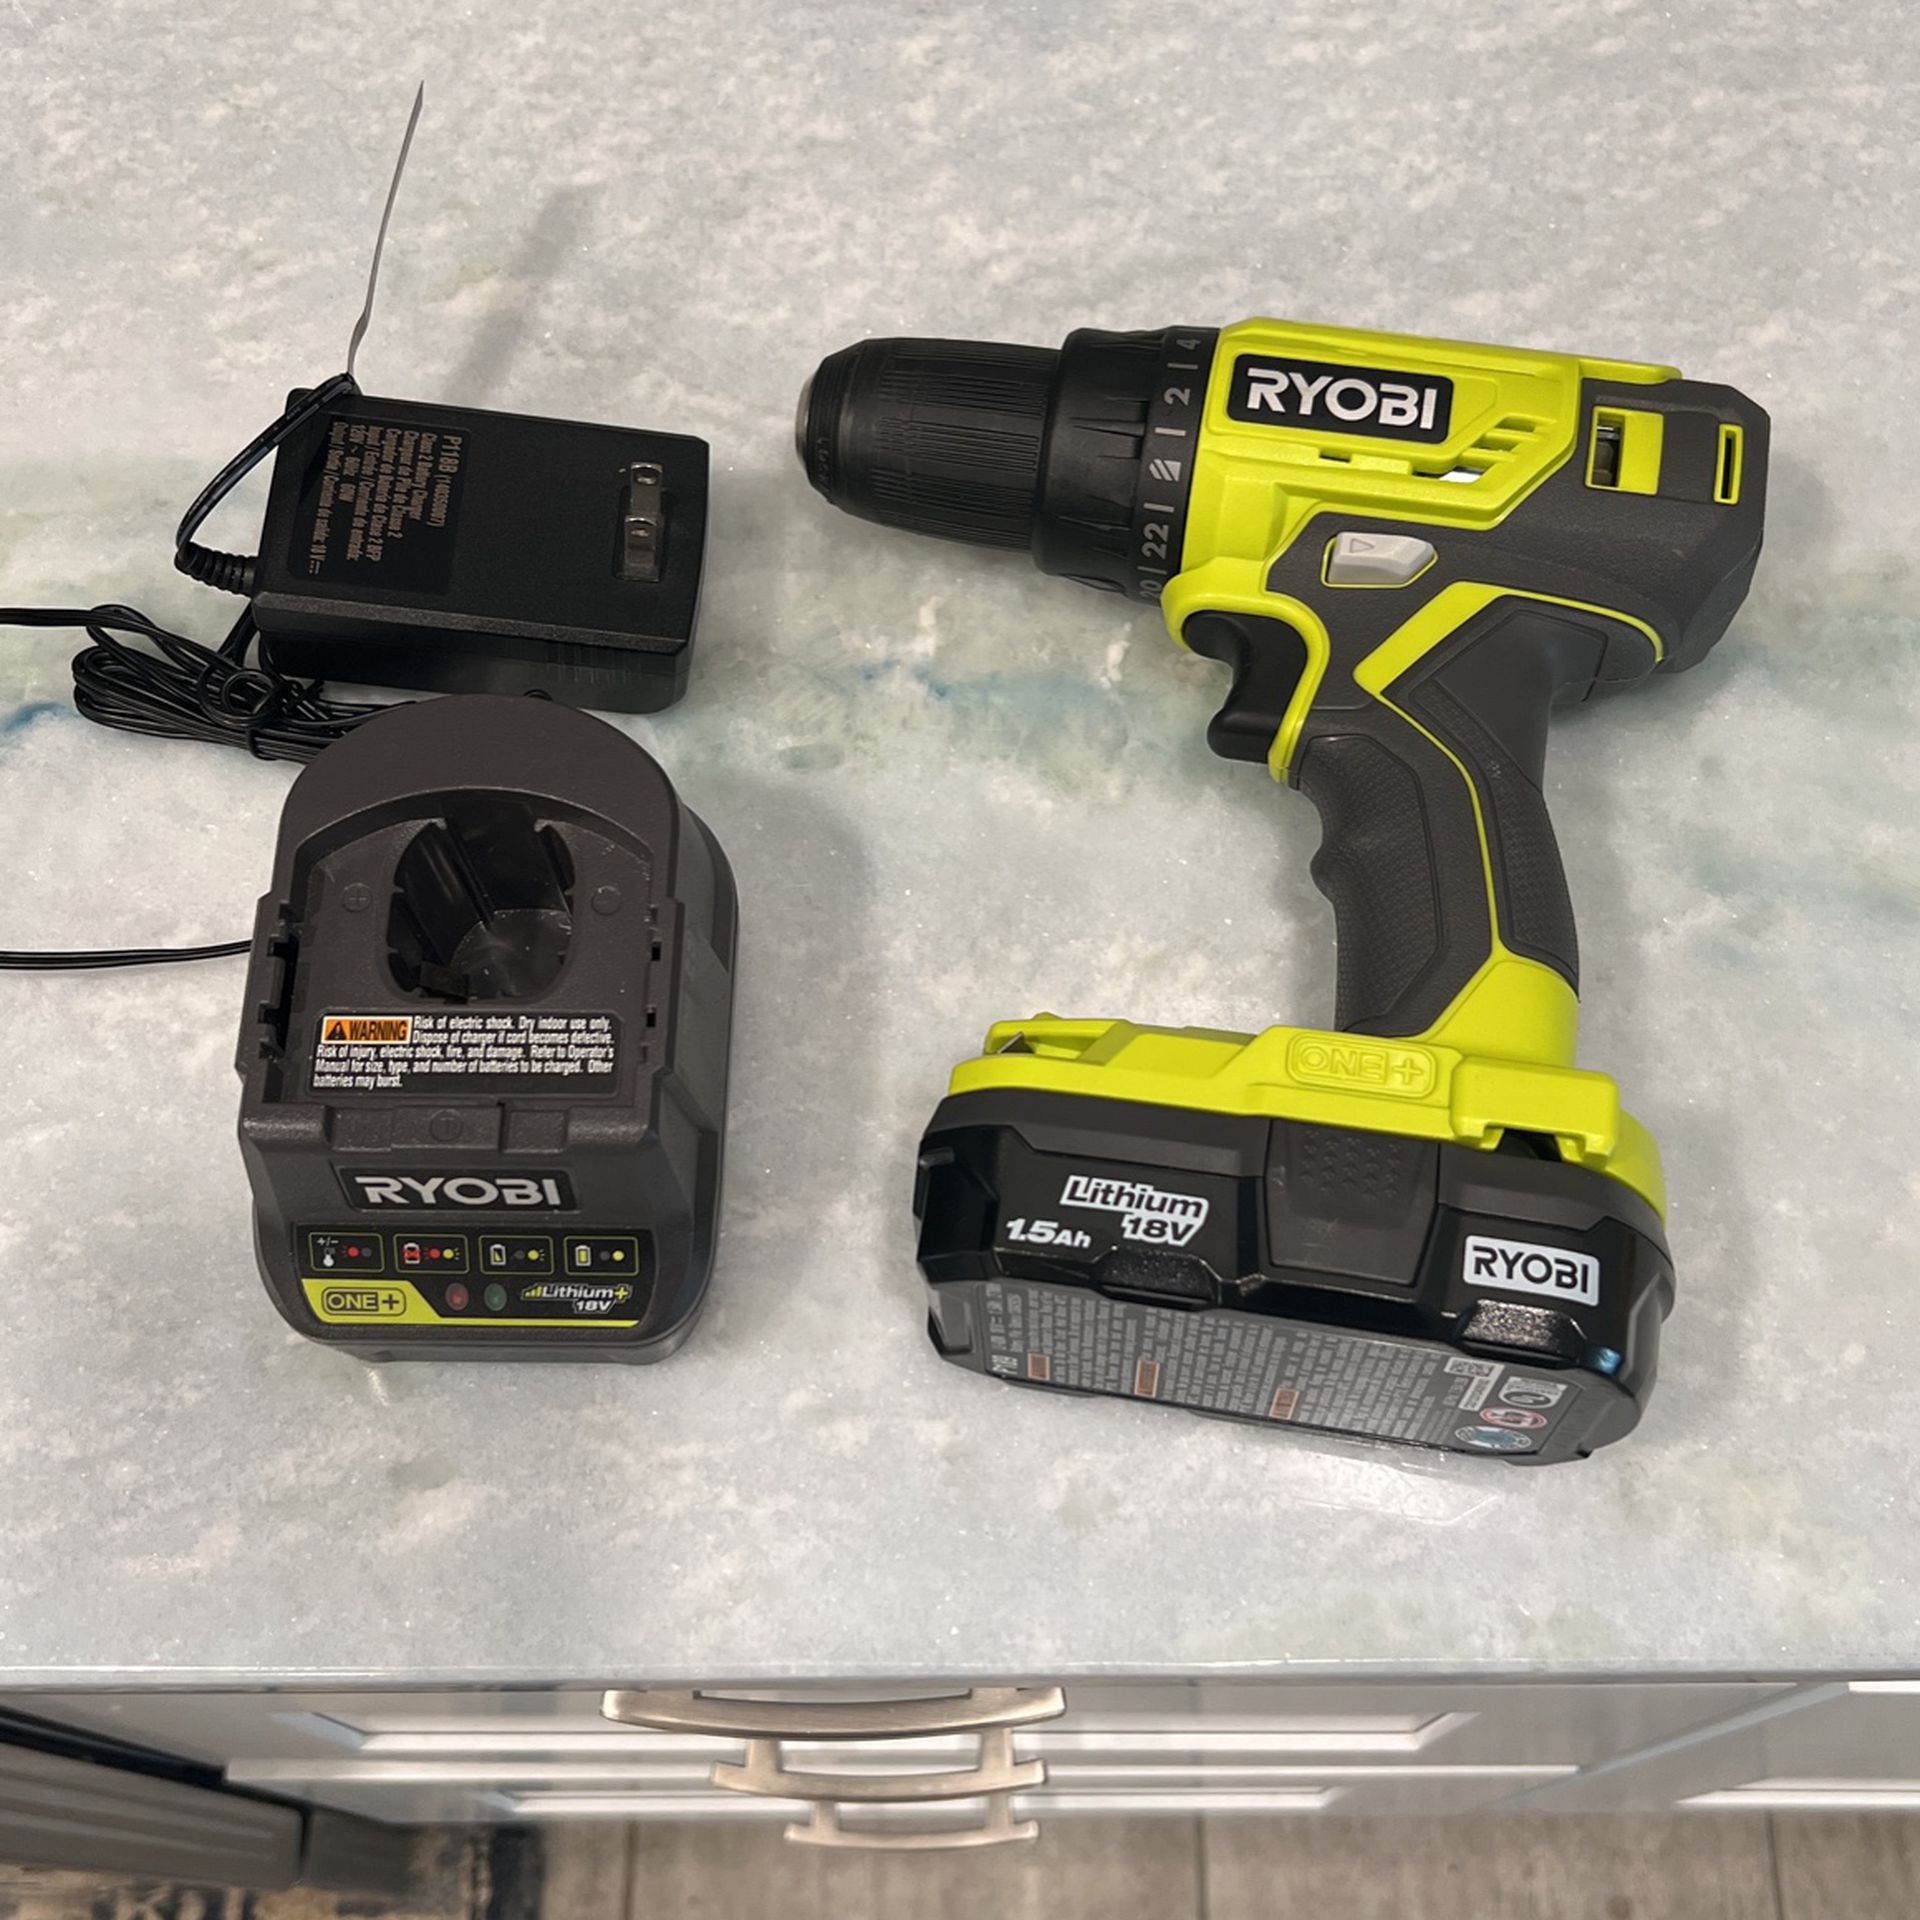 New Ryobi Cordless Drill With Battery And Charger. 